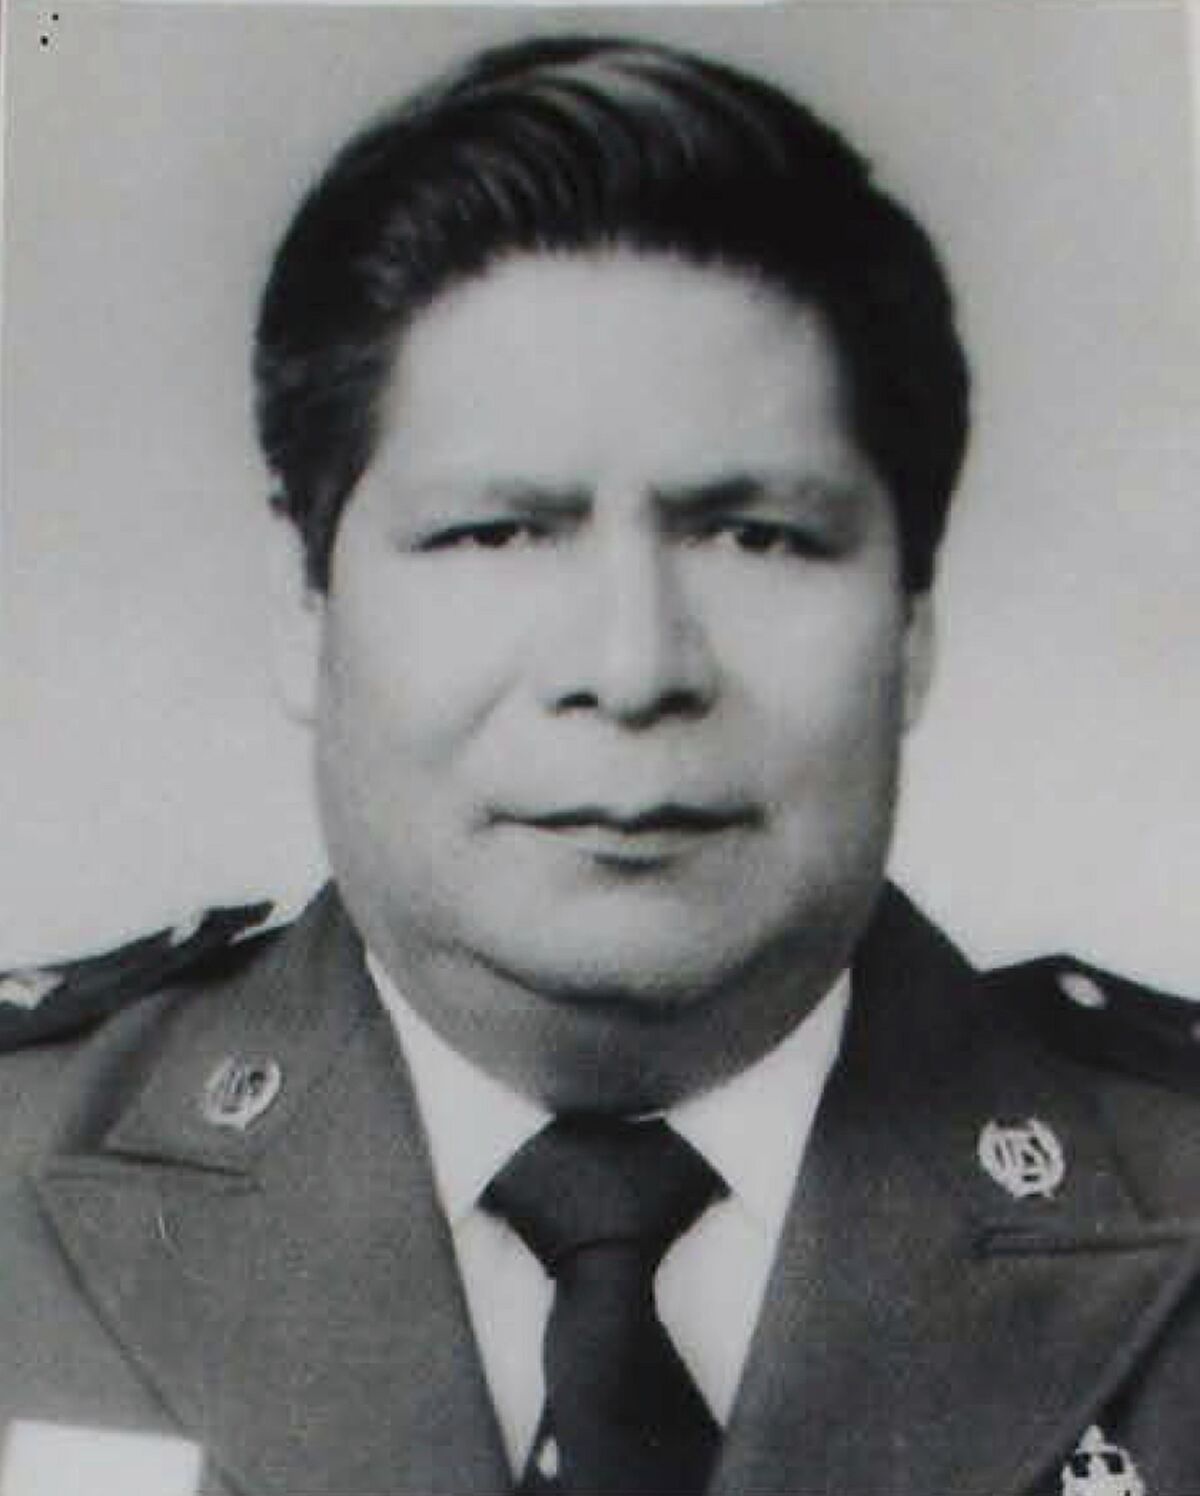 This undated trial exhibit photo released by the U.S. Attorney's Office, Central District of California, shows Catalino Esteban Valiente Alonzo, of Fontana, Calif. The former Guatemalan police chief has been found guilty of lying on his U.S. immigration papers about a prior conviction for killing two political activists in his country, U.S. authorities said Monday, Jan. 30, 2023. Alonzo, an 82-year-old resident of Fontana, was convicted last week of using a green card obtained by making a false statement, U.S. prosecutors said said in a statement. (U.S. Attorney's Office, Central District of California via AP)